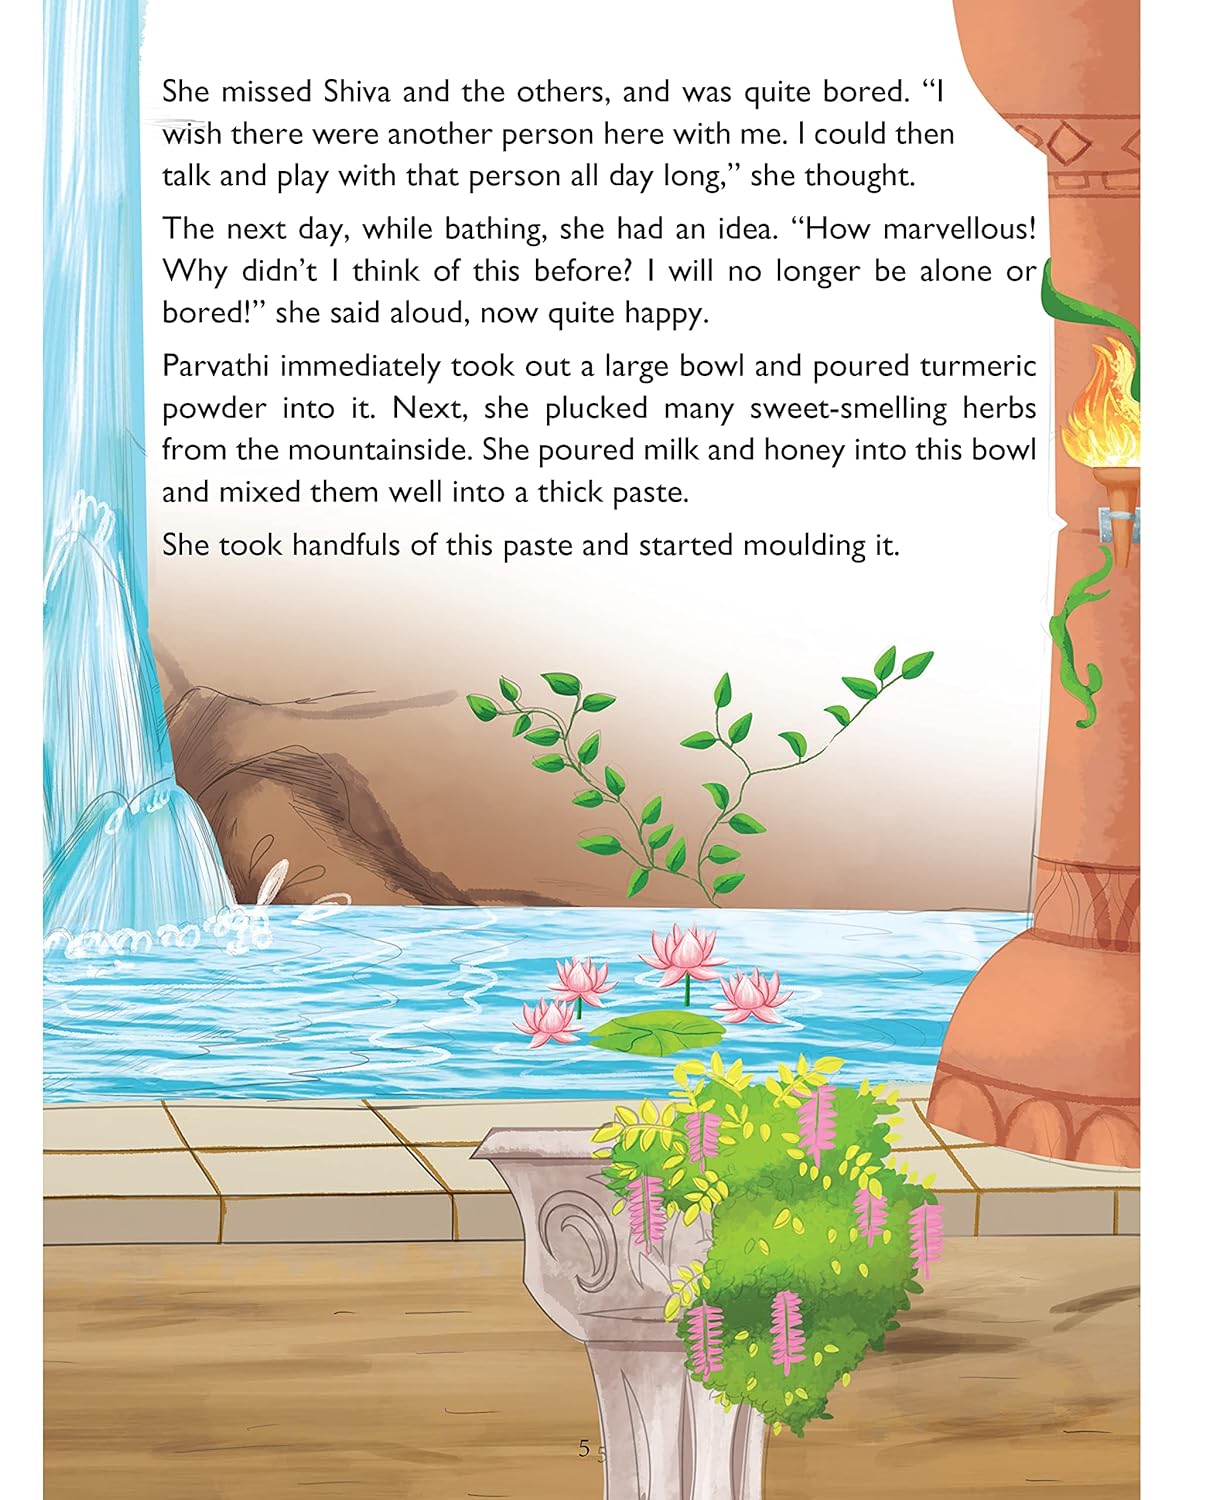 Pegasus Tales of Victorious Lord Ganesha - Indian Mythological Stories for kids